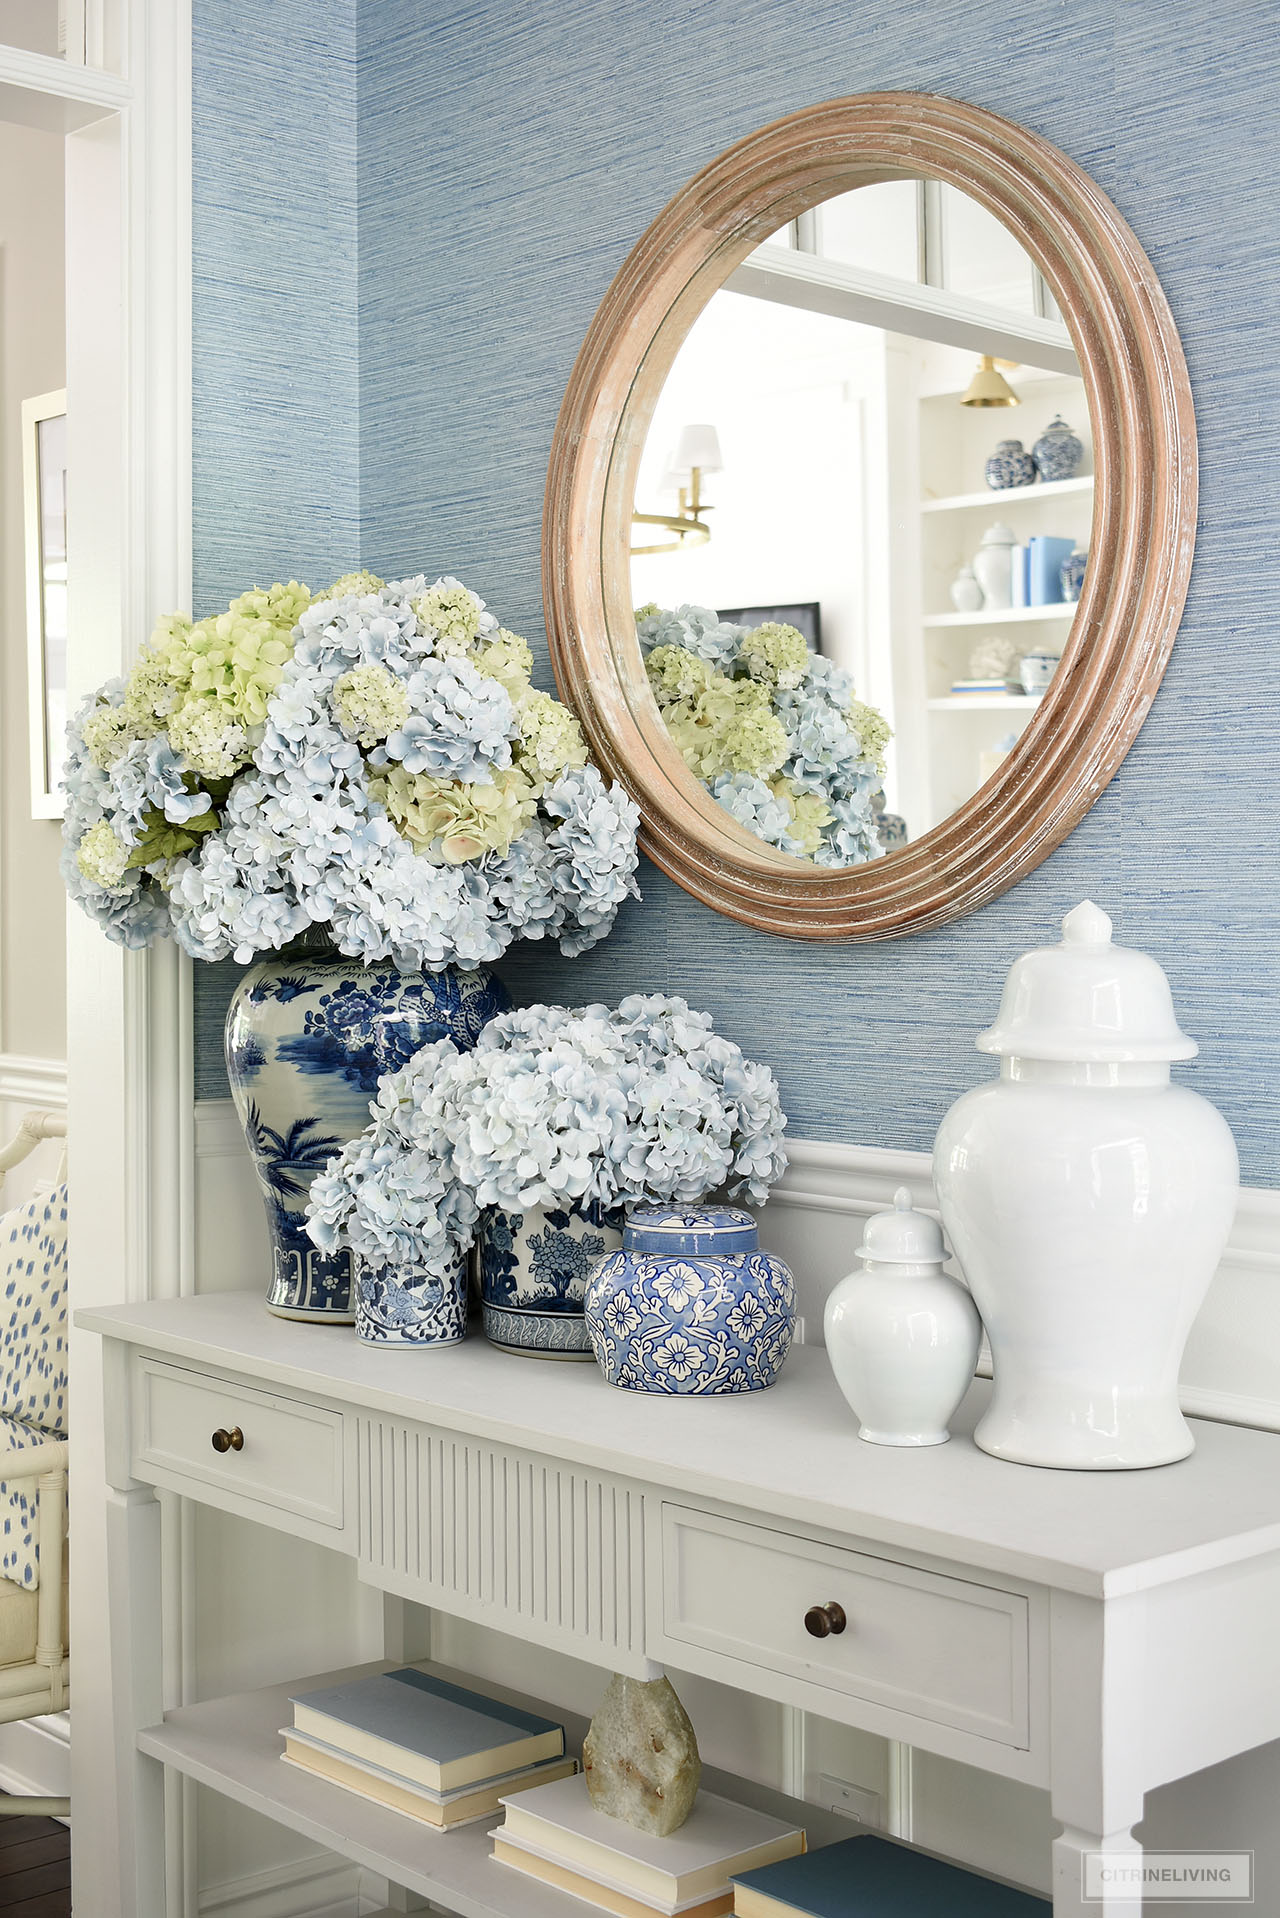 A closeup view of a gorgeous summer console table display with blue and white ginger jars and containers filled with light blue and green hydrangeas.